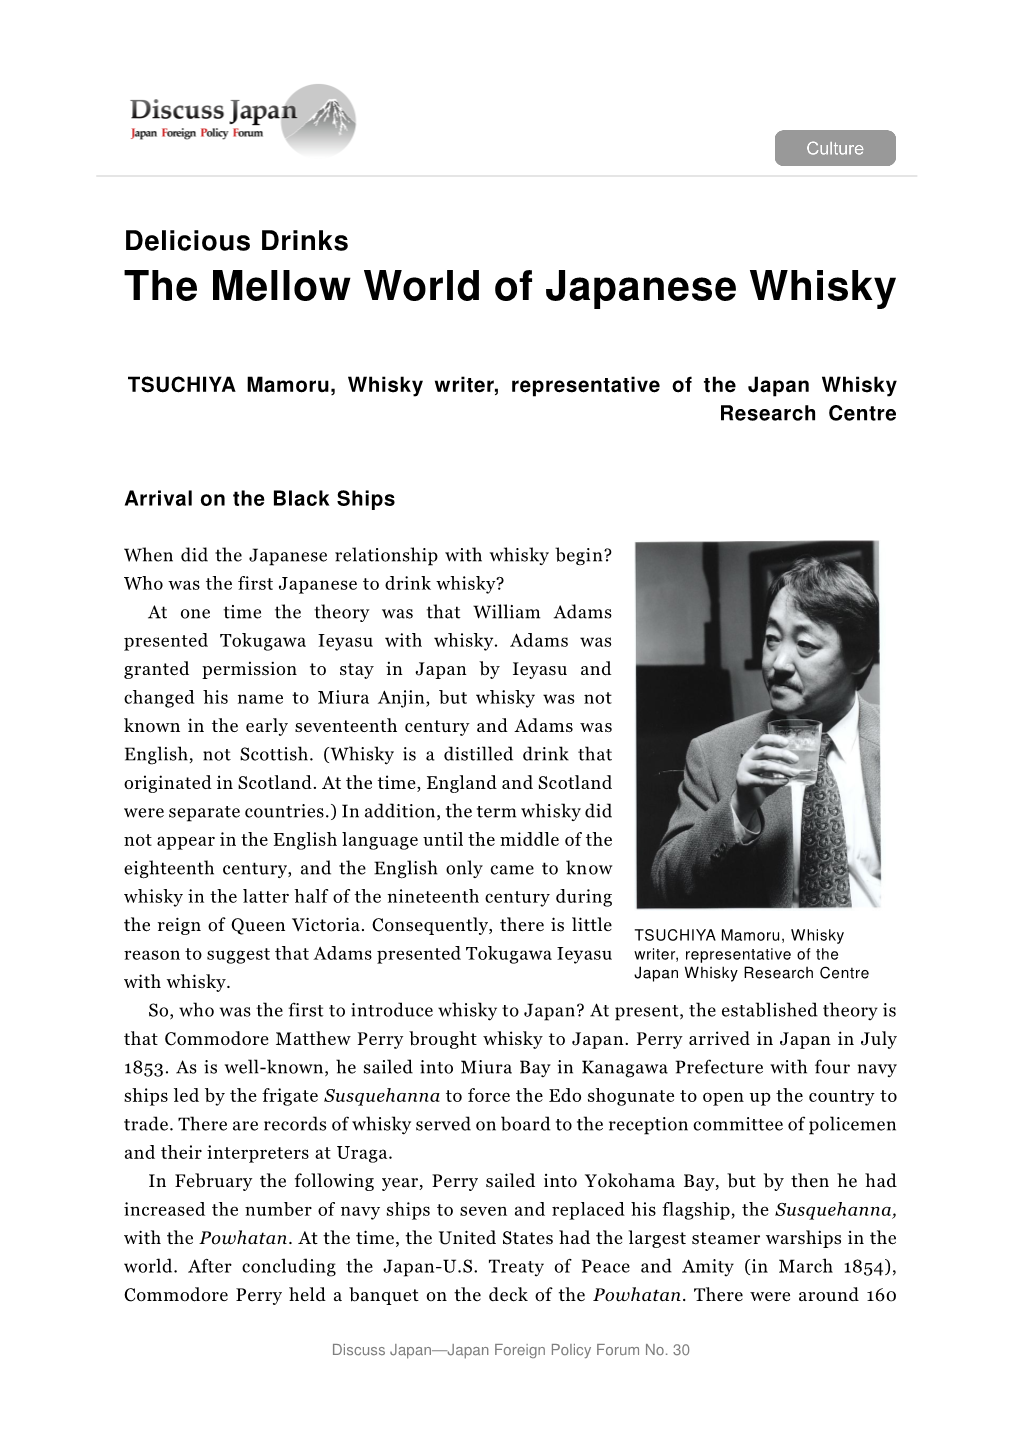 The Mellow World of Japanese Whisky